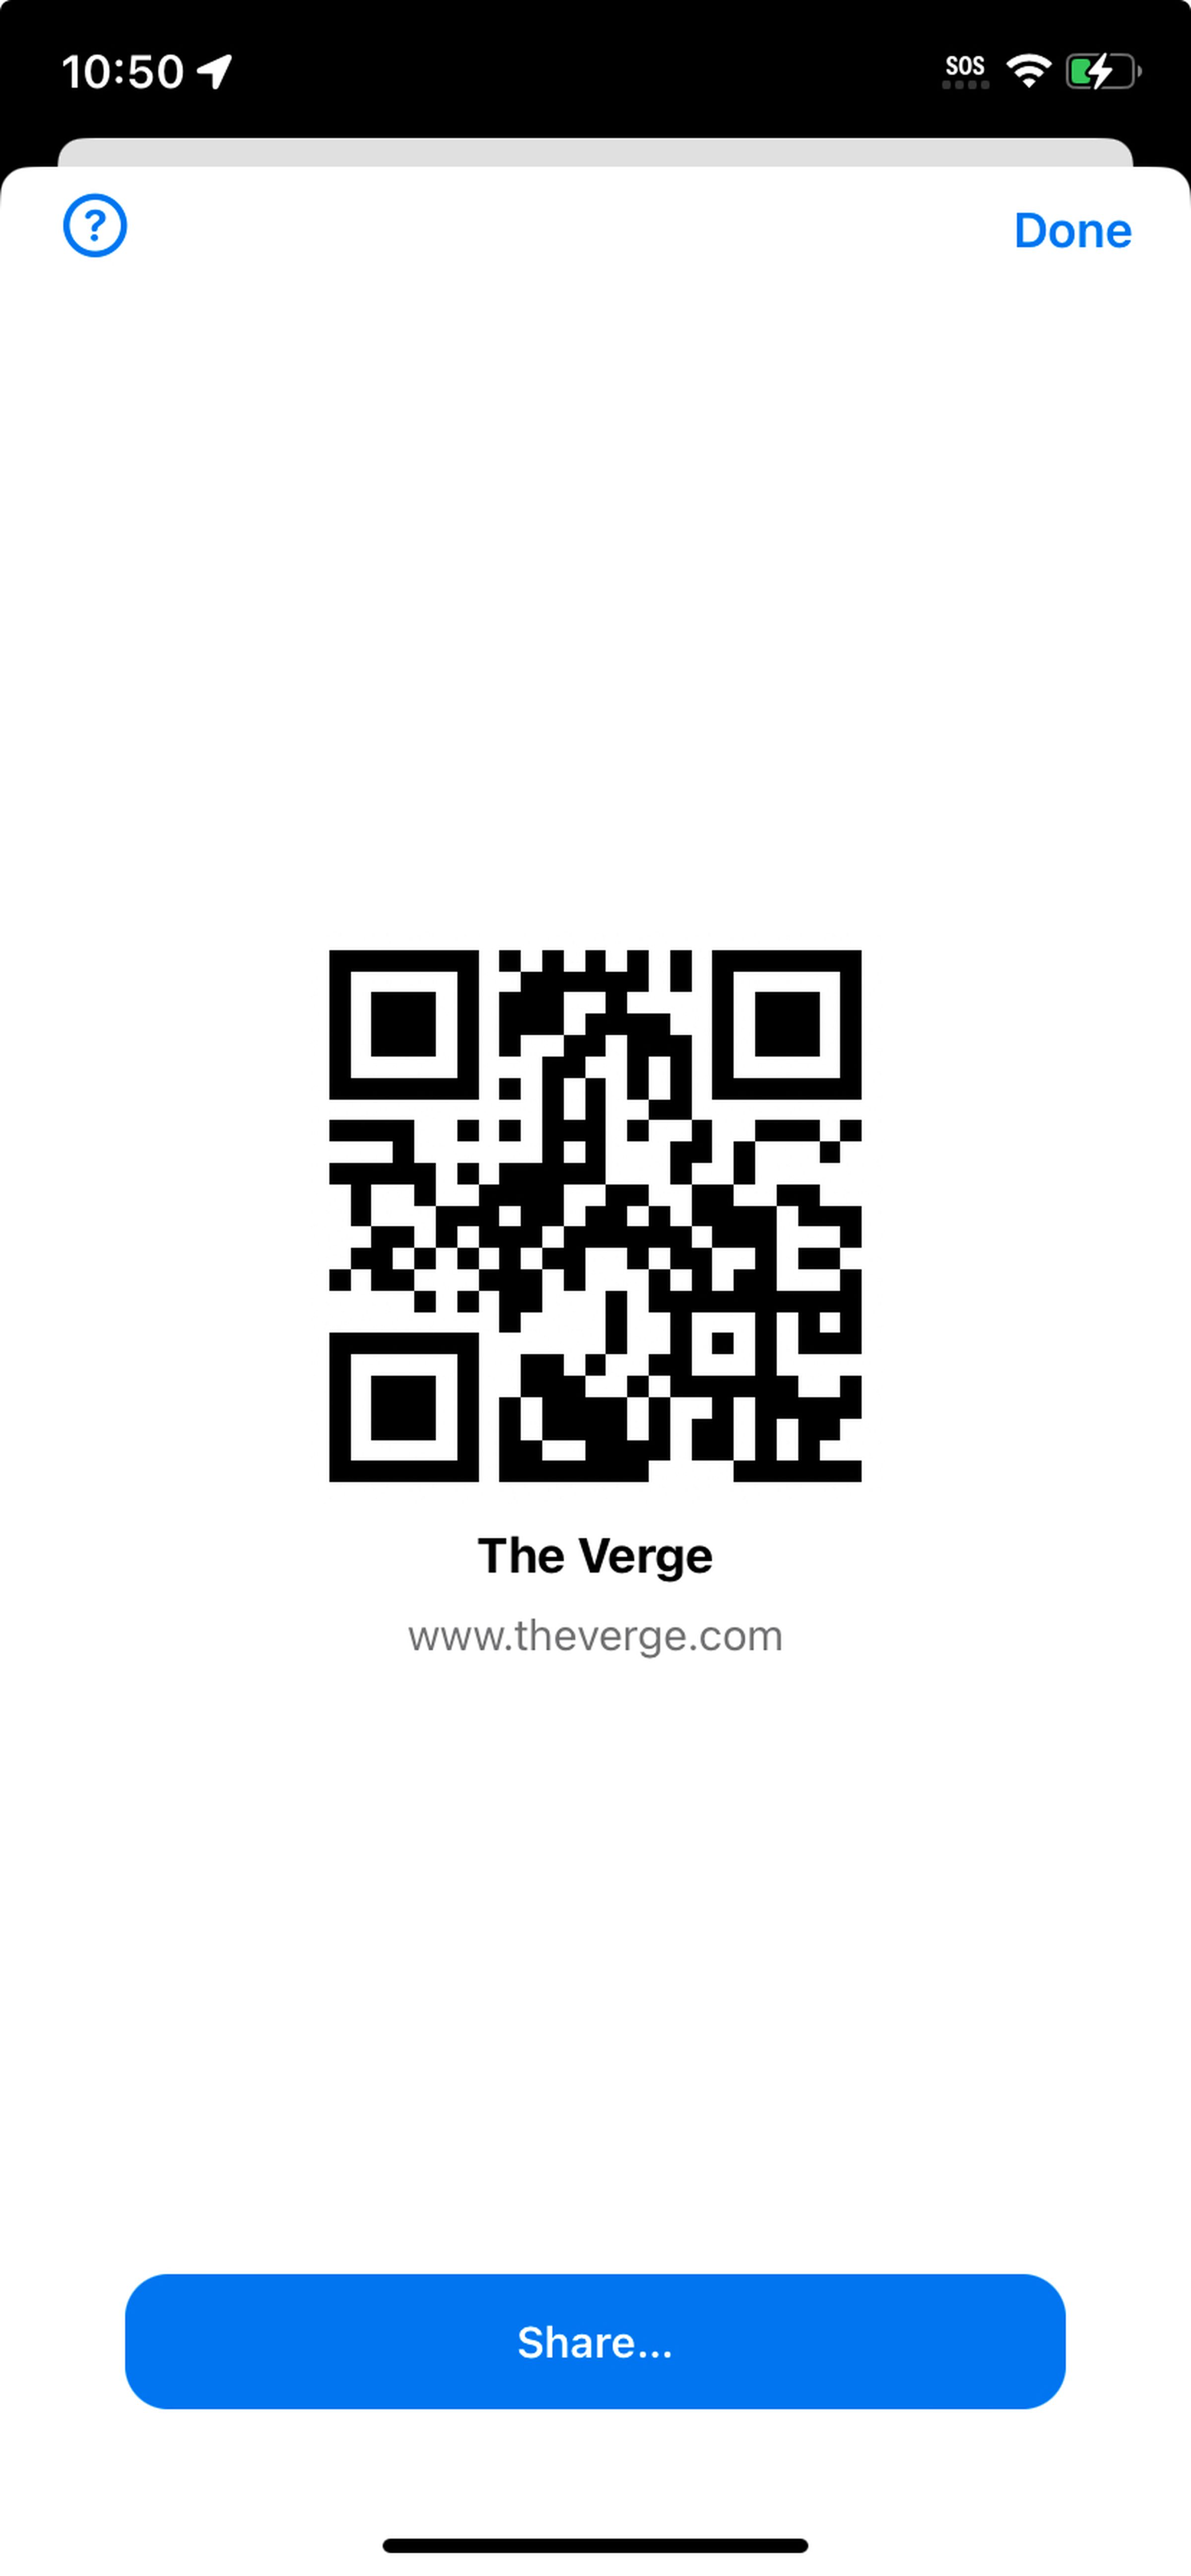 QR Code for The Verge with a Share button underneath.